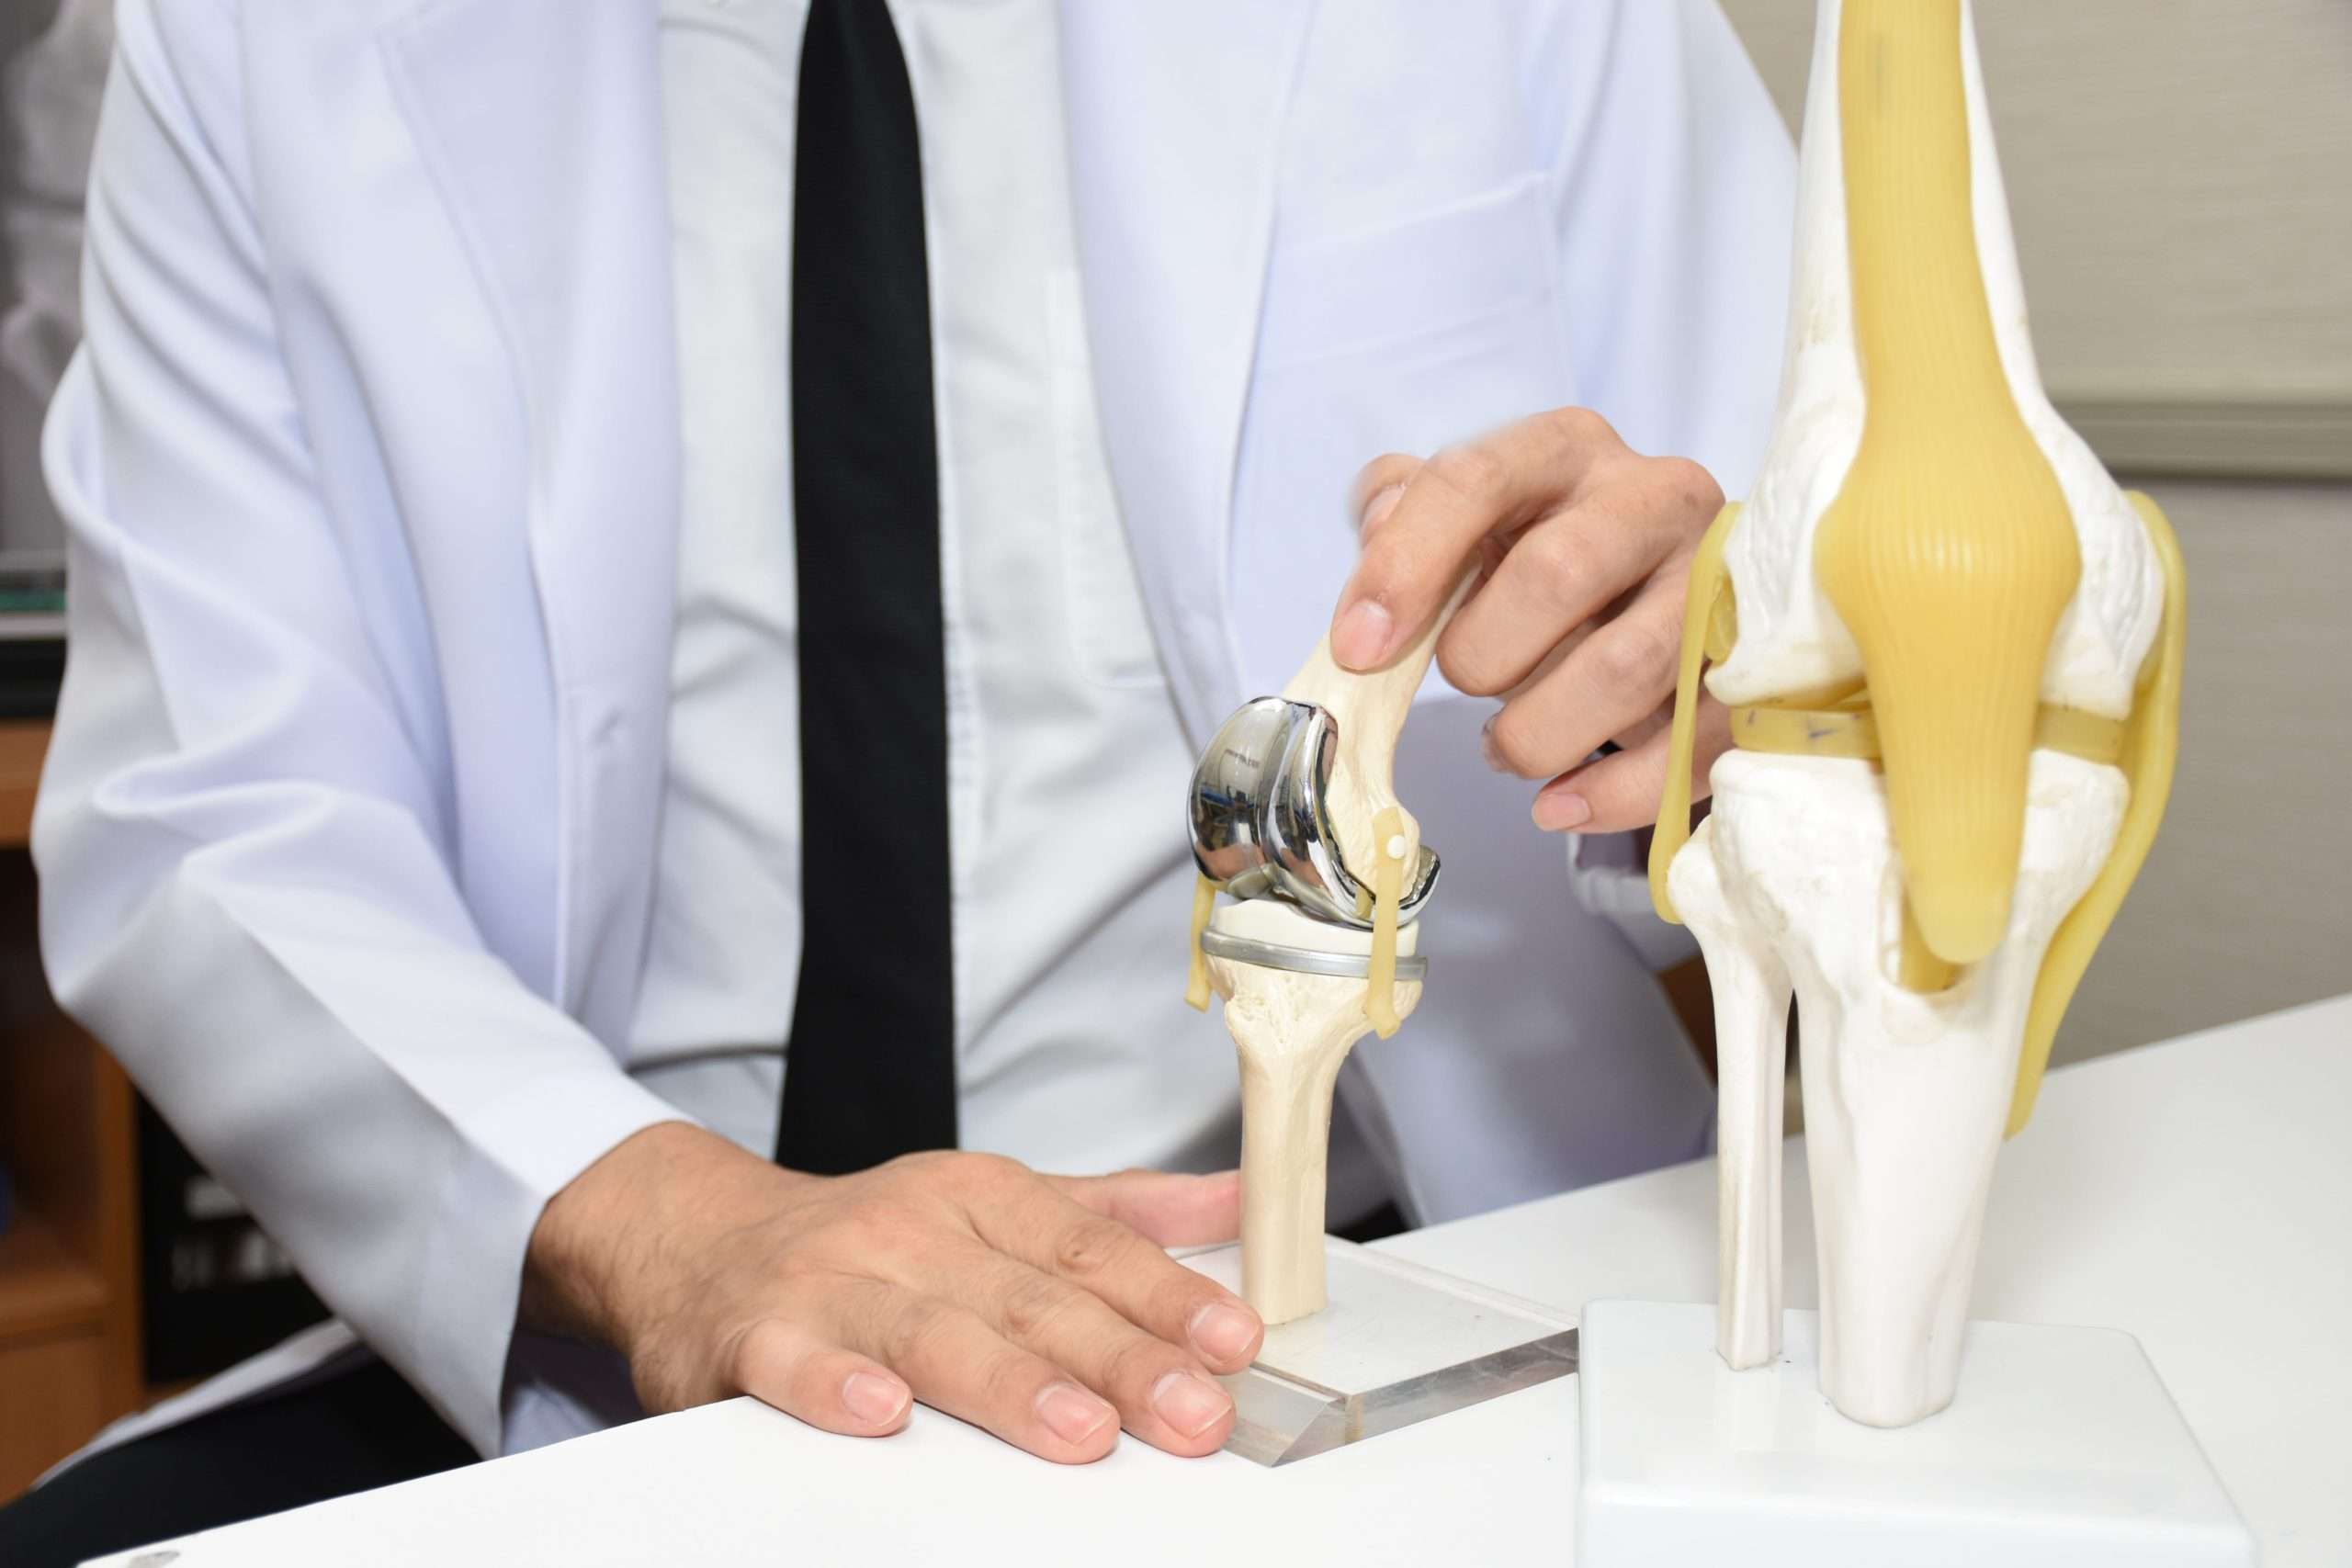 Should I Get a Knee Replacement?